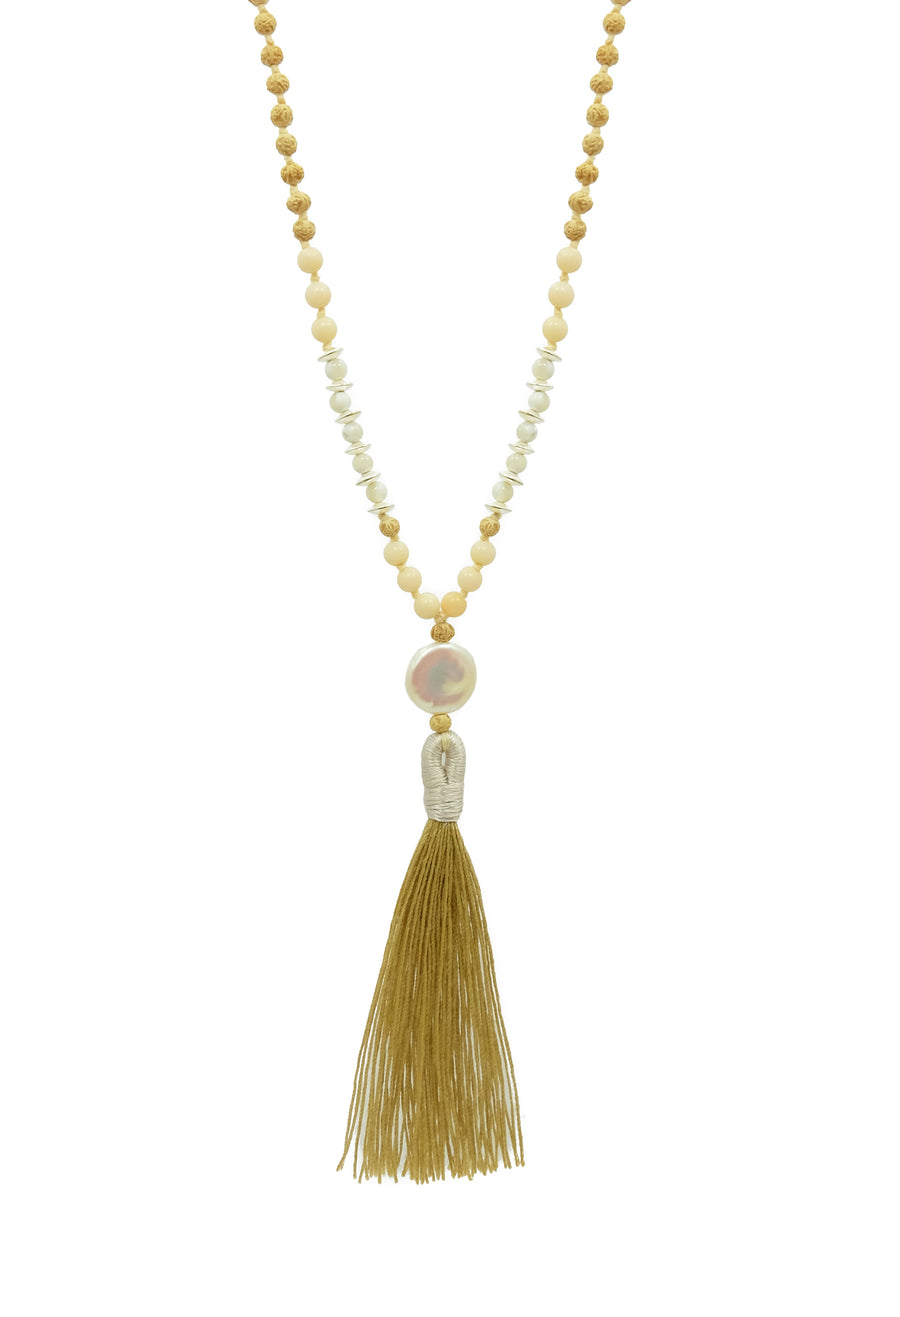 Uluwatu Moon Mala featuring pearls, corals, moonstone, and elegant sterling silver accents by www.balimalas.com.